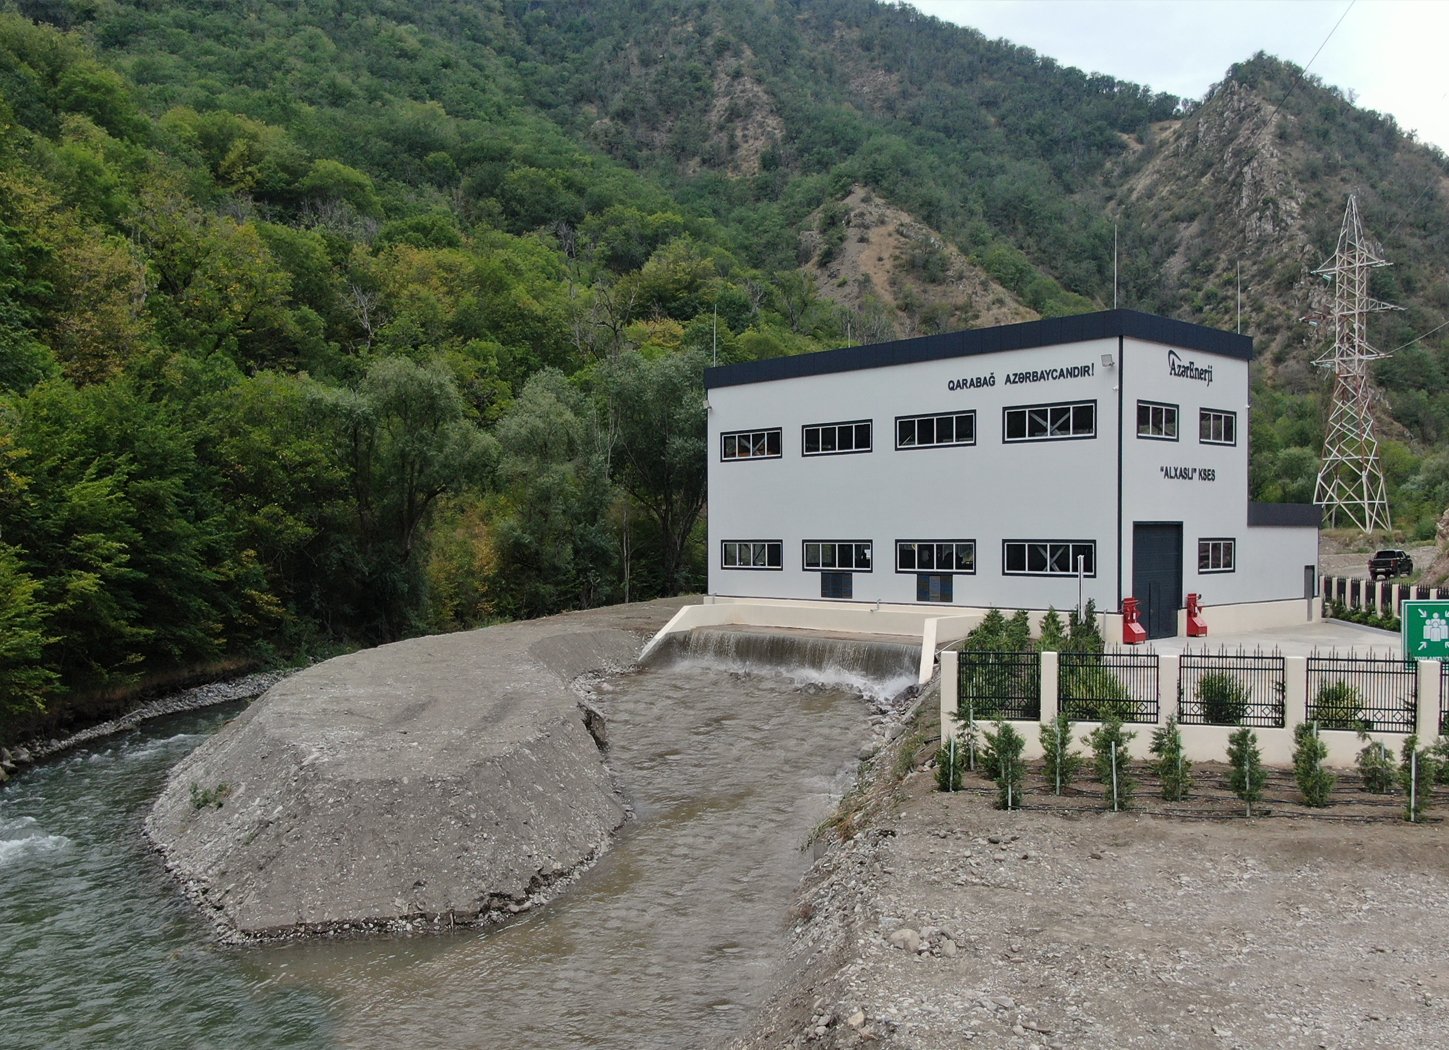 Azerbaijan airs commissioning of new hydropower plants in its Lachin this year (VIDEO)